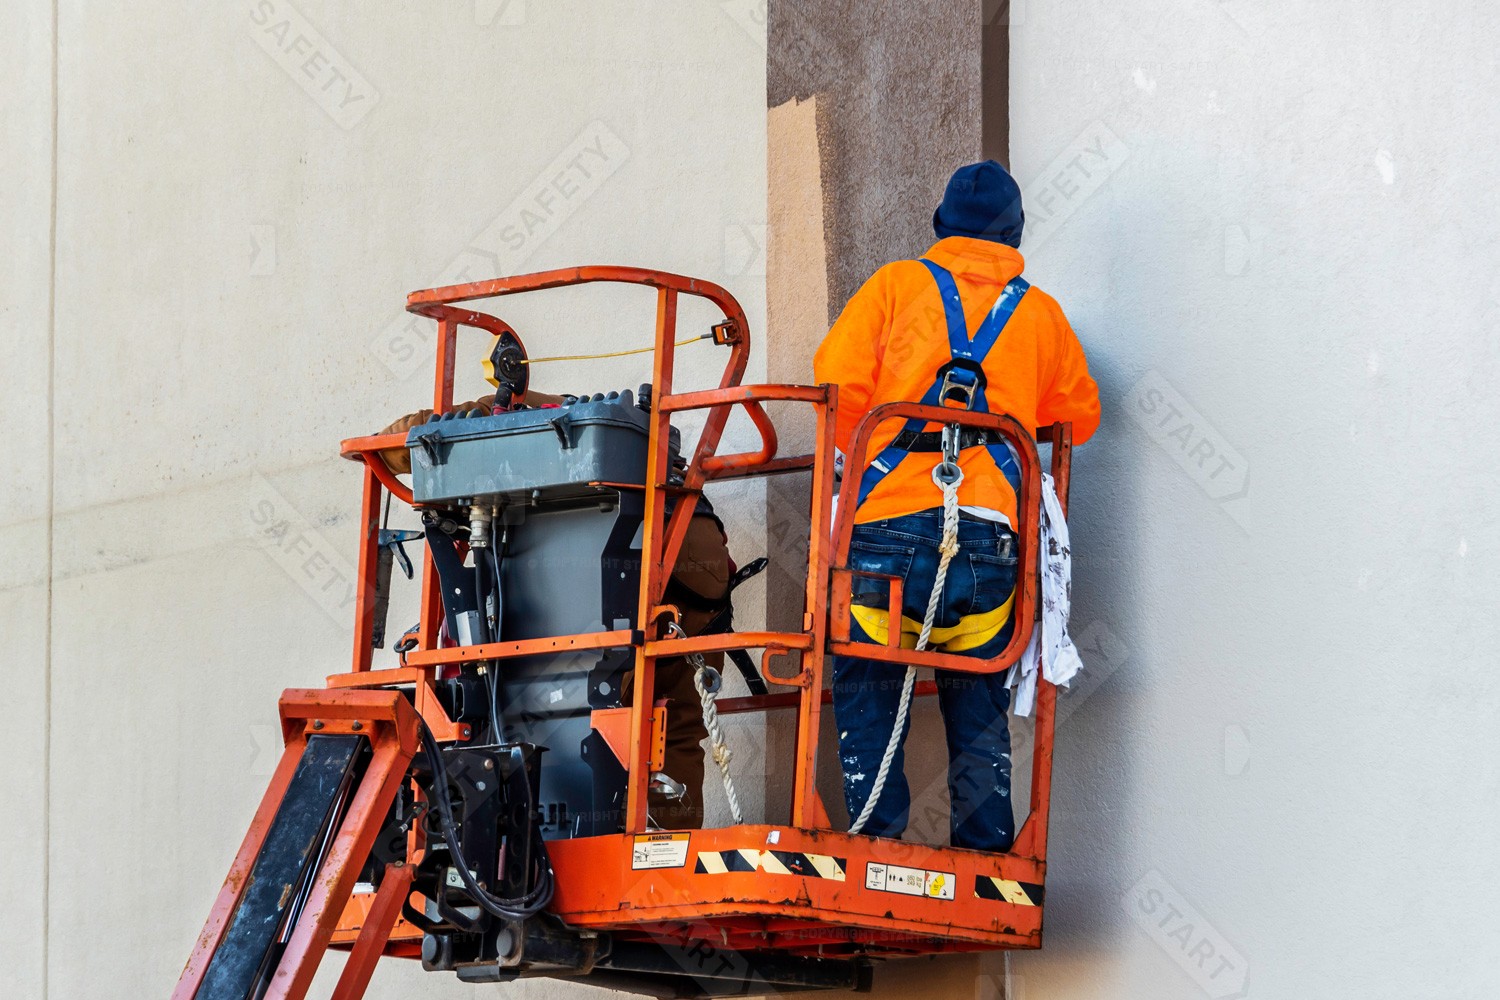 Civil Engineer Wearing A Harness While Working In A Cherry Picker